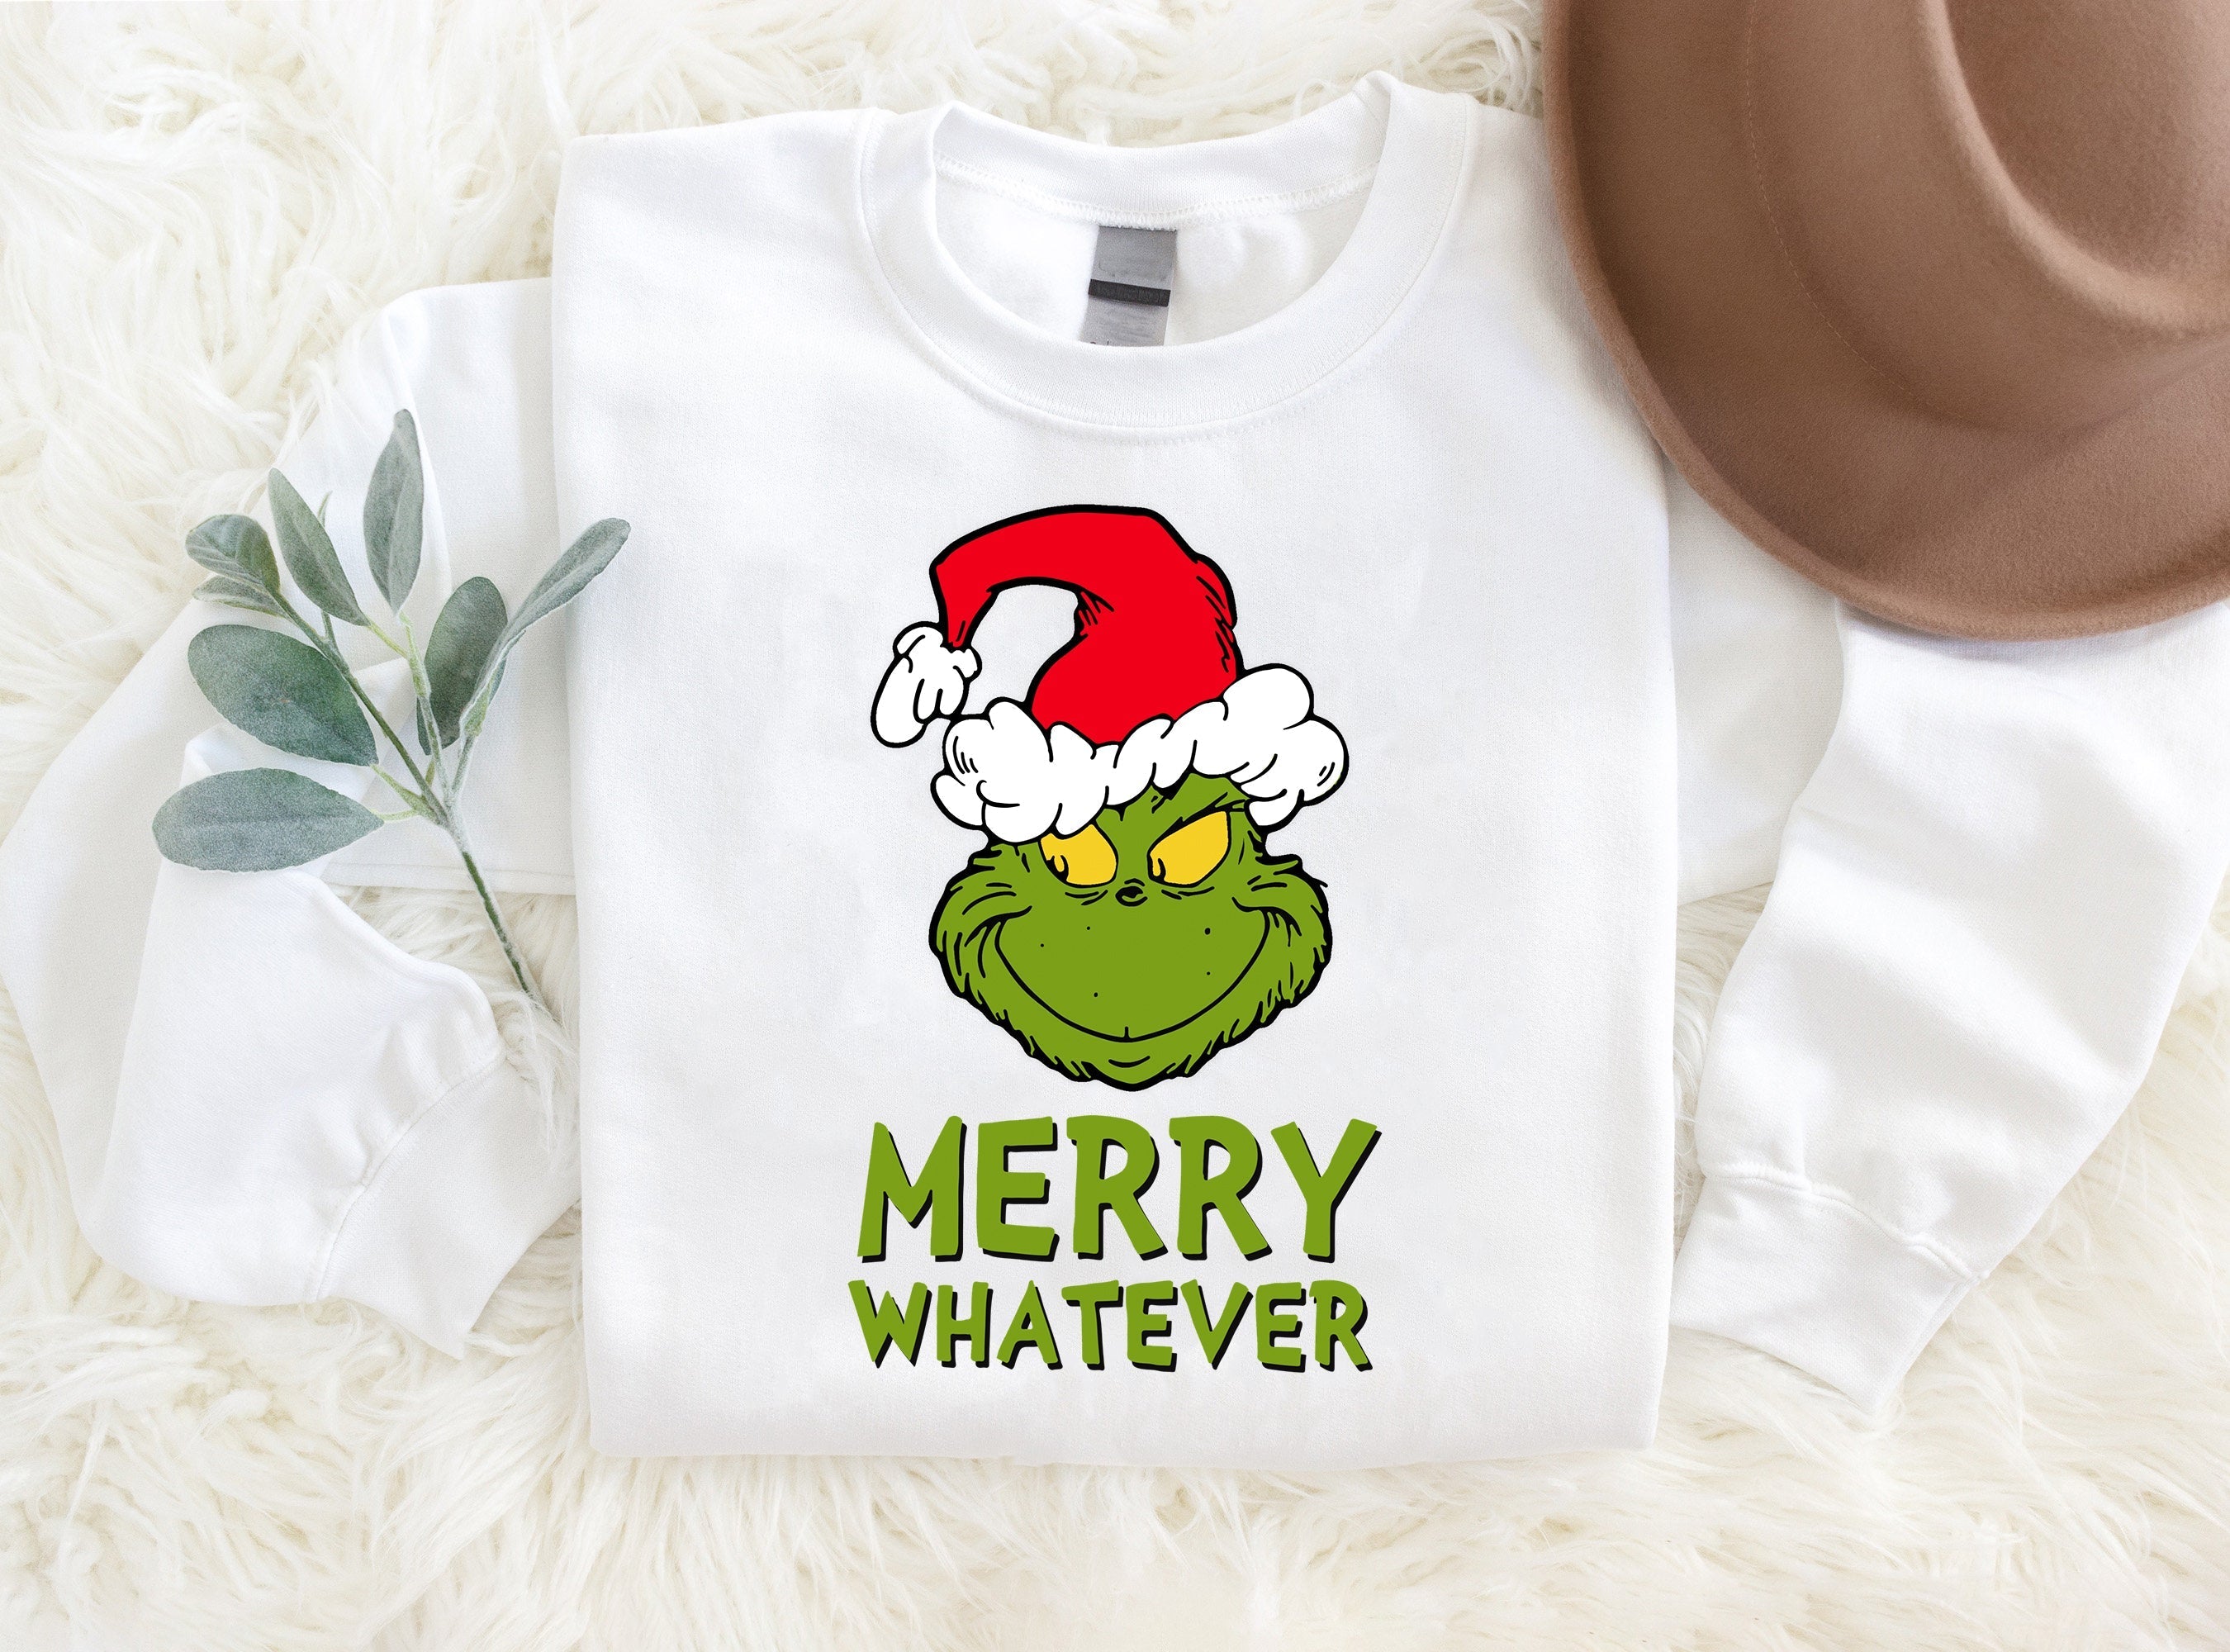 Family Christmas Matching Pajamas Tops 'Merry Whatever' Letter Print Casual White Color Long Sleeve Sweatshirts And Dog Bandana